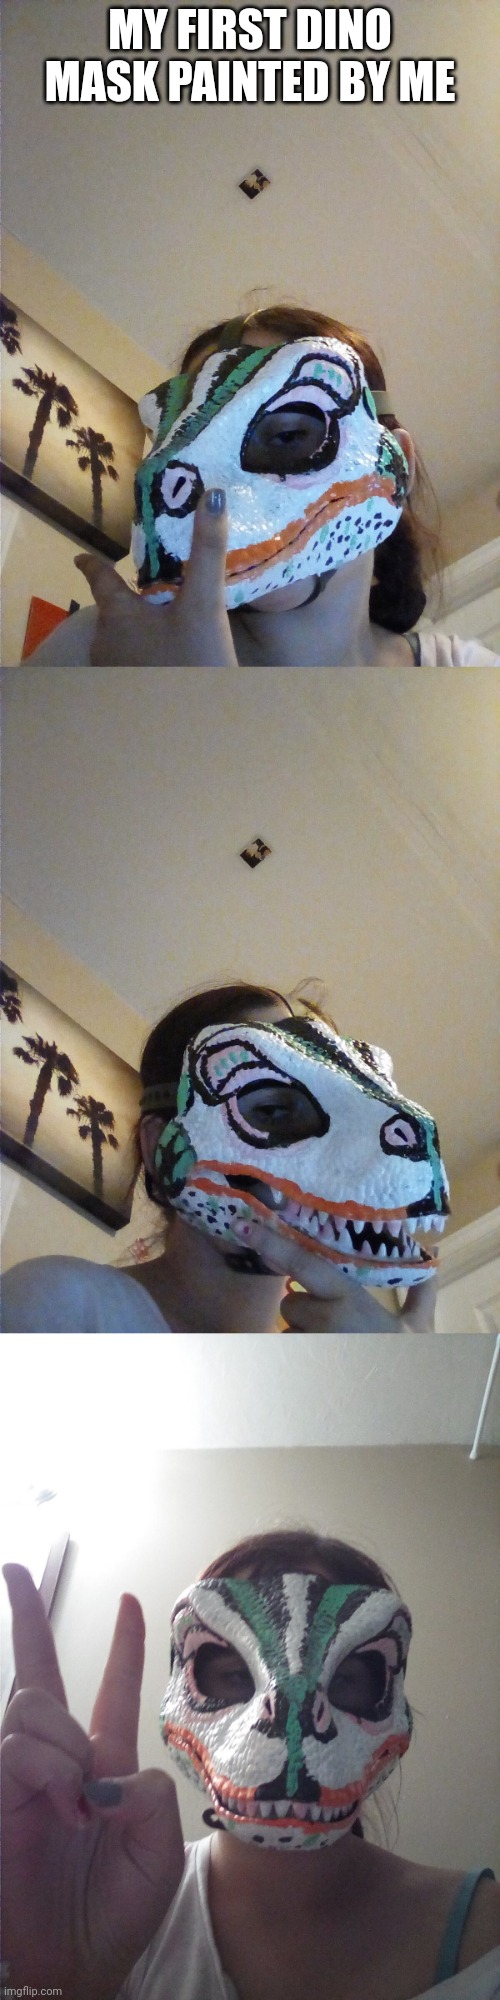 MY FIRST DINO MASK PAINTED BY ME | made w/ Imgflip meme maker